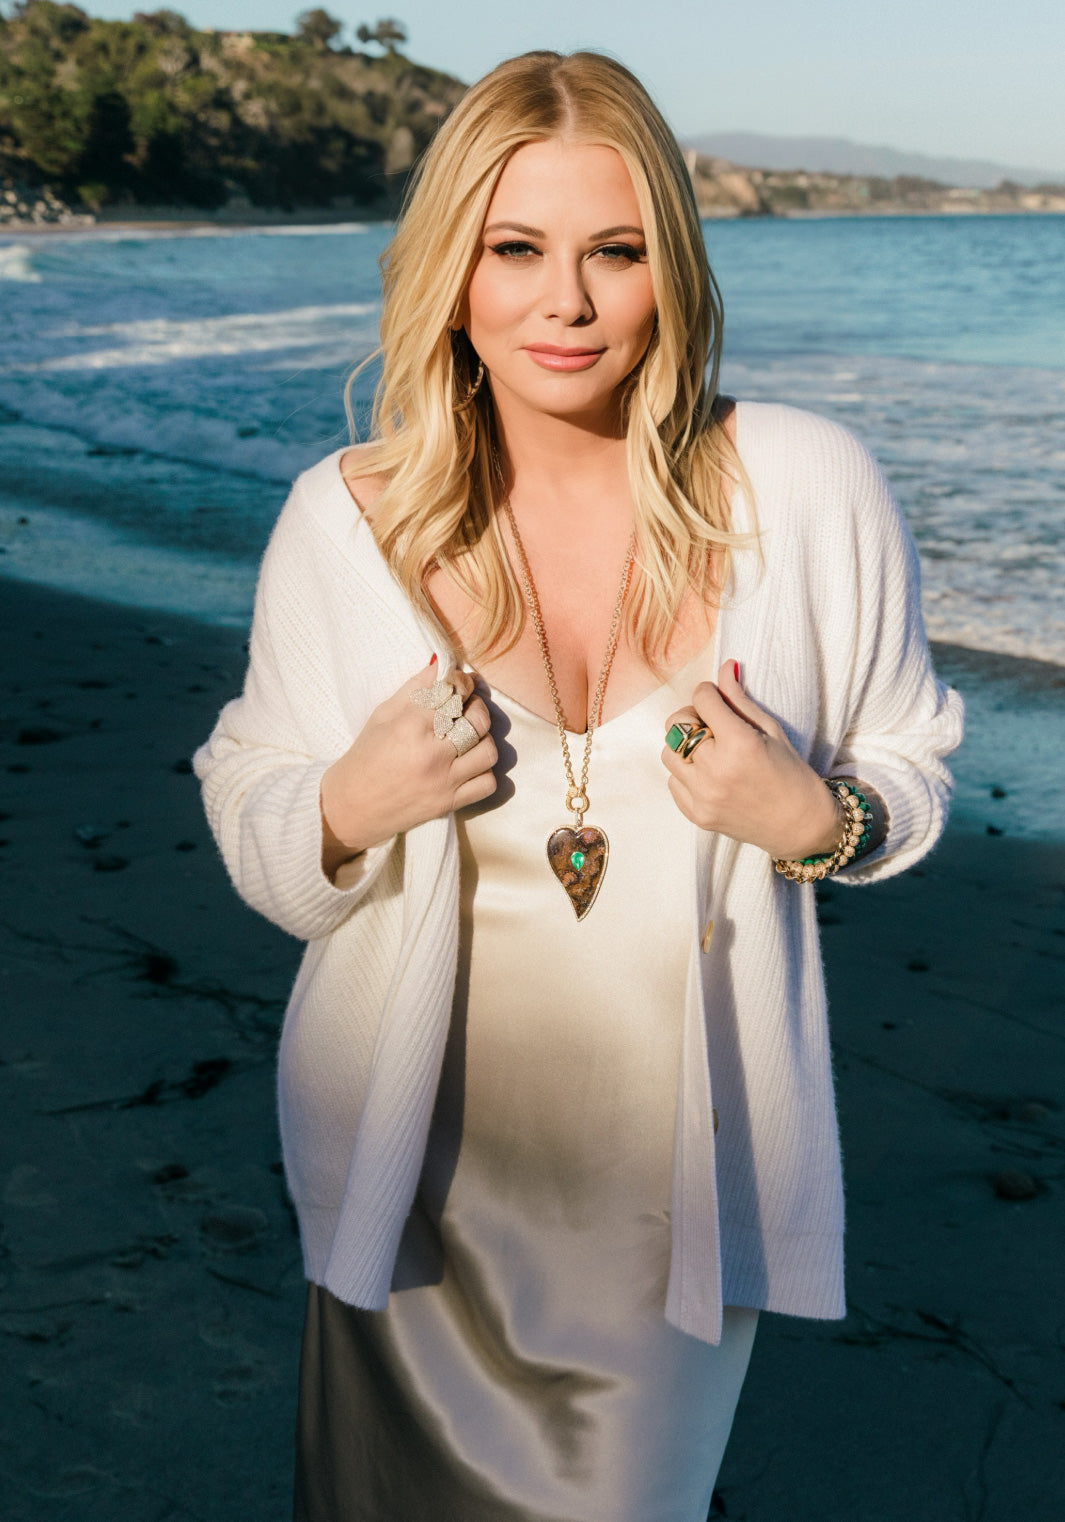 On a Montecito beach, Sheryl Berkoff Lowe models a necklace, bracelets, earrings and rings from her line of women's jewelry.